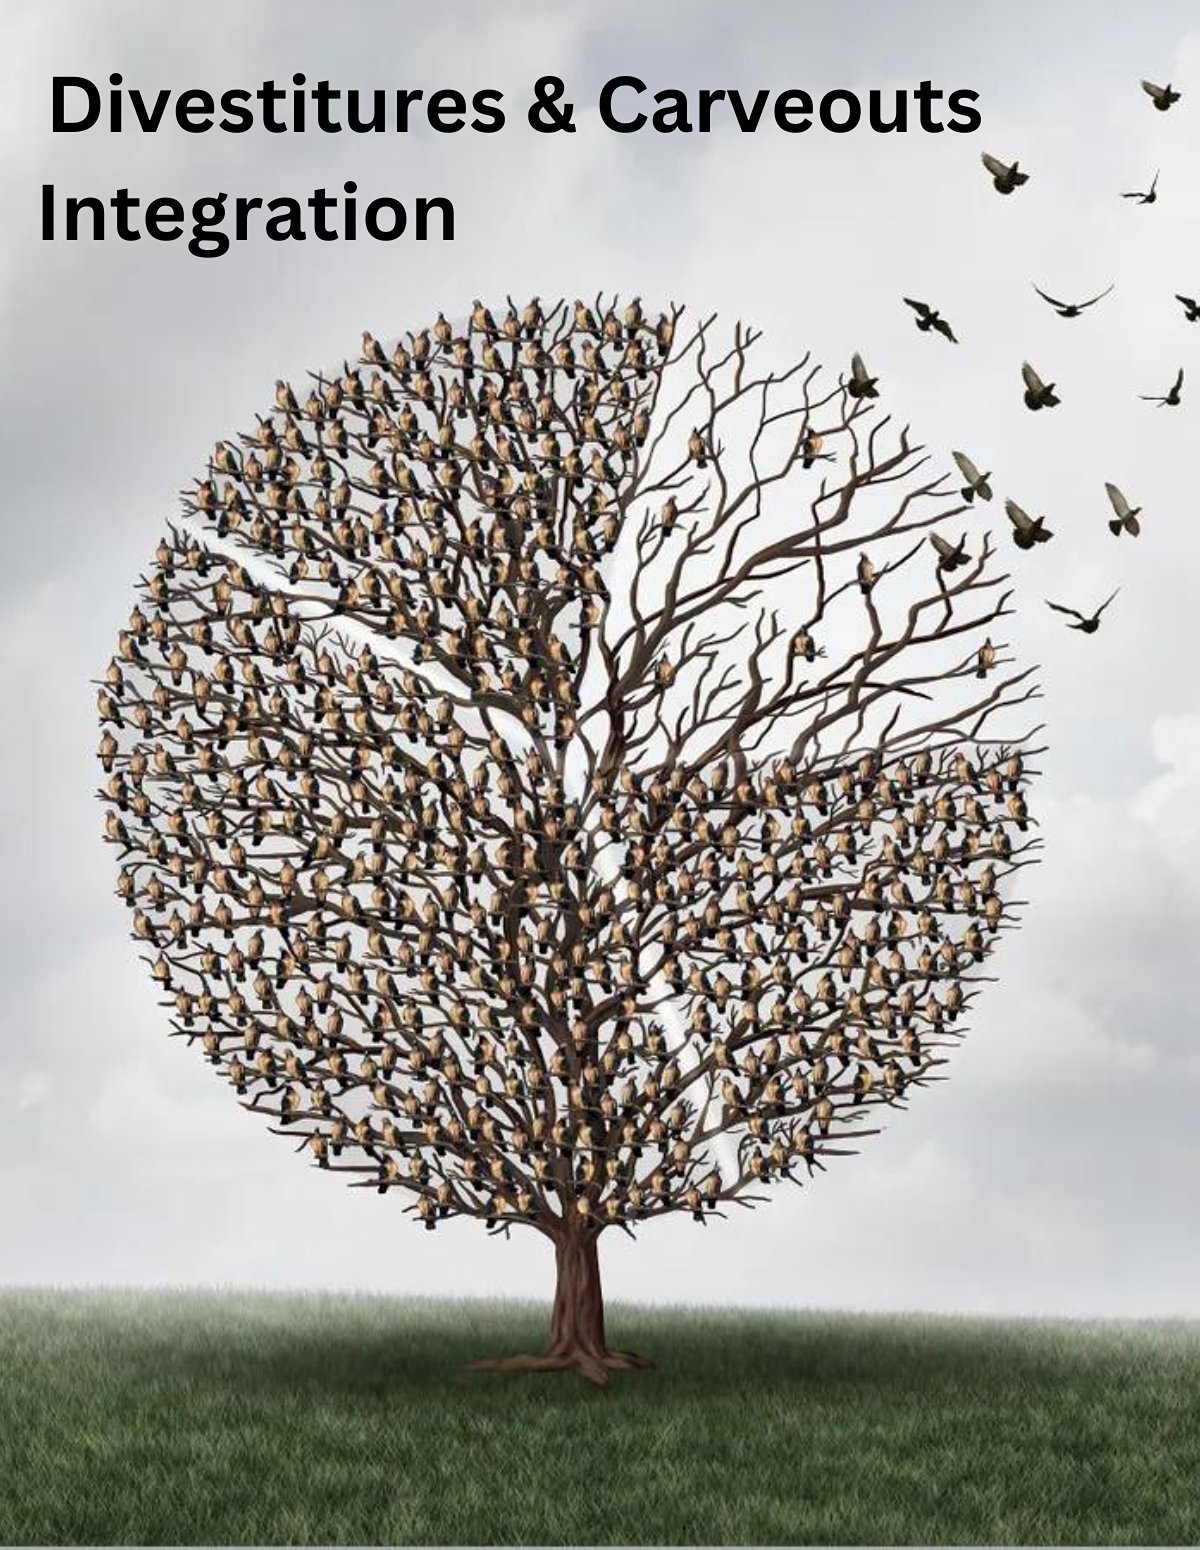 Divestitures and Carveouts eBook - Integration